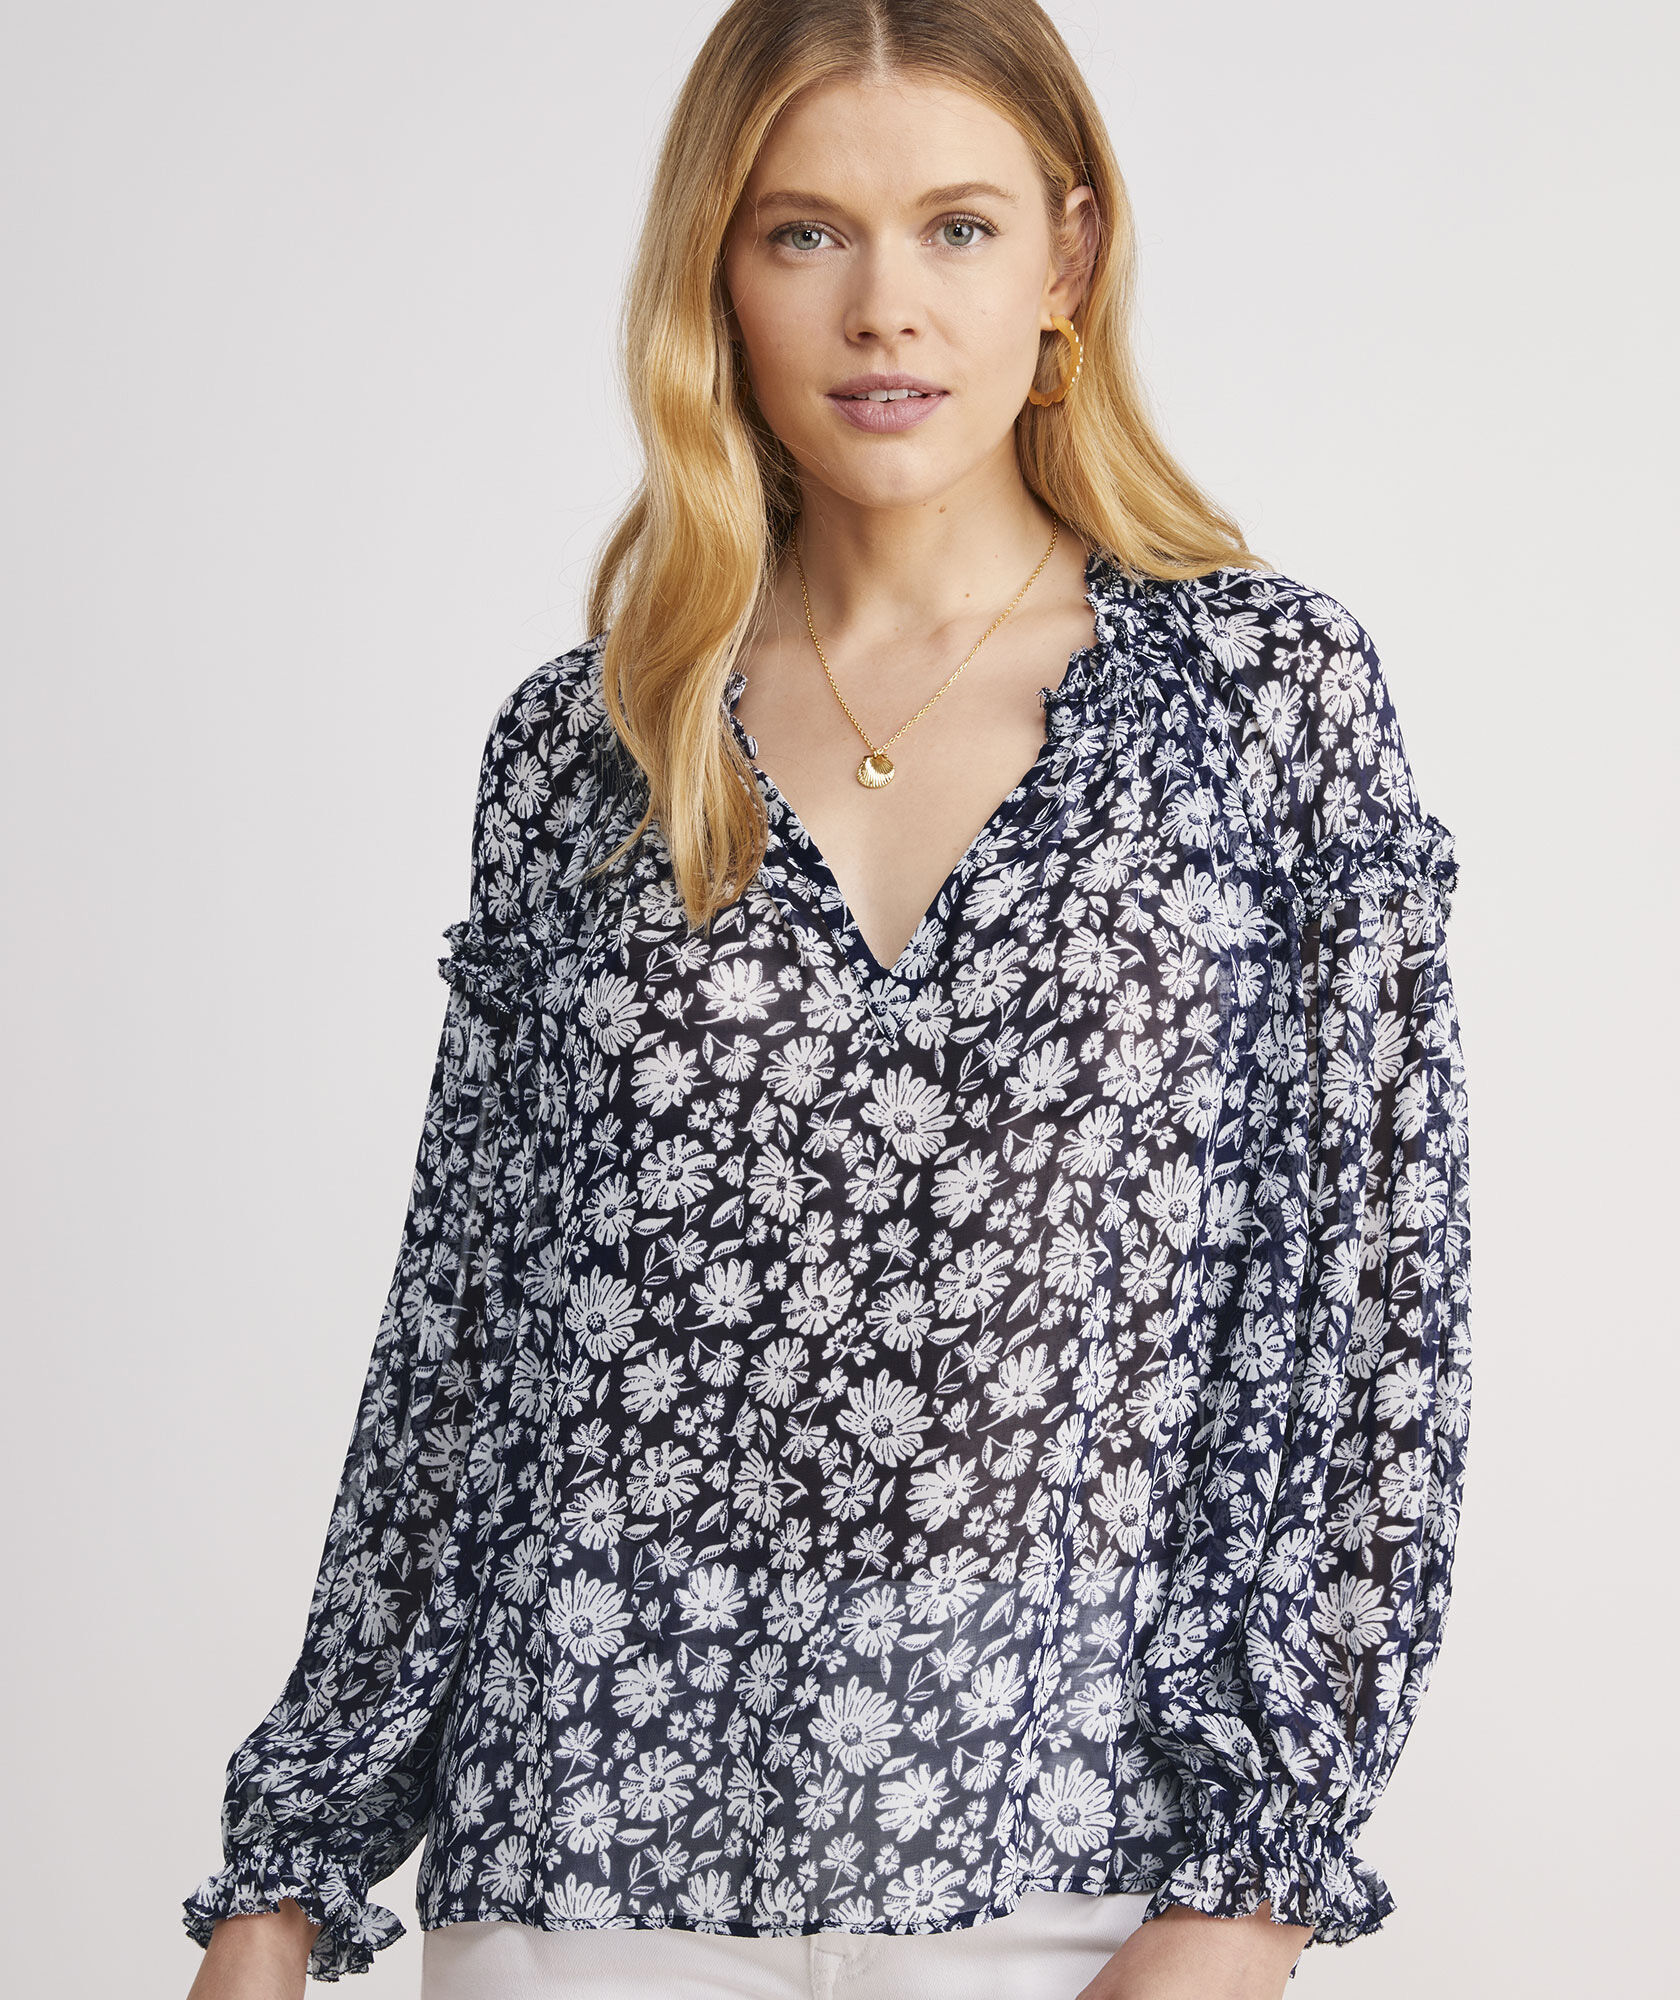 Ivy League Floral Ruffle Popover